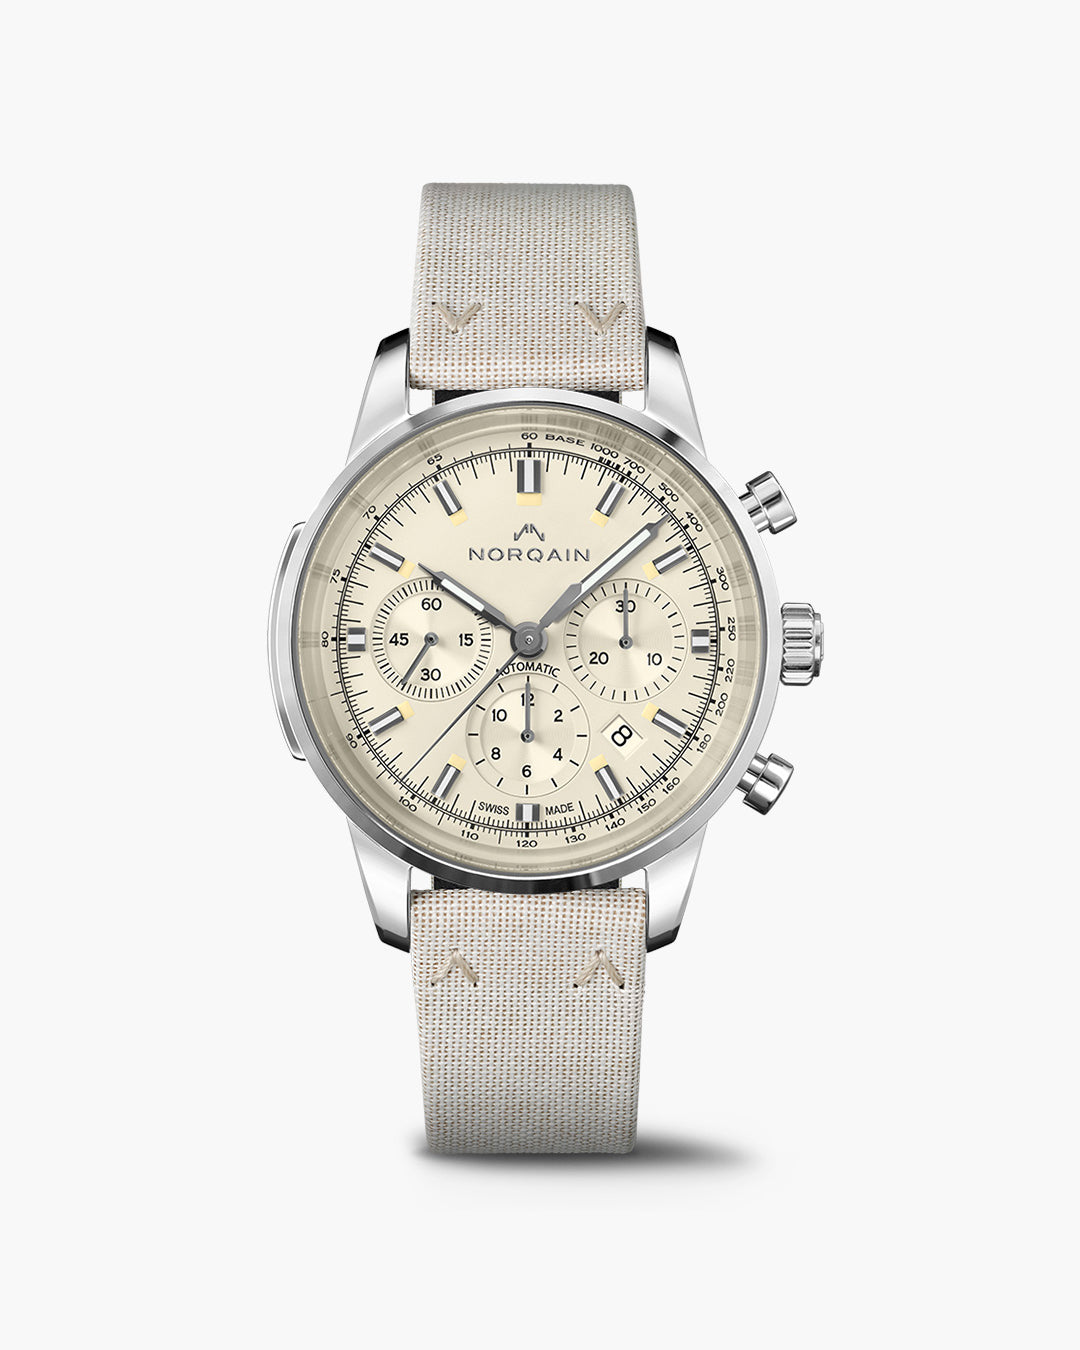 Shop Alpina Watches - Official U.S. Site – Alpina Watches USA